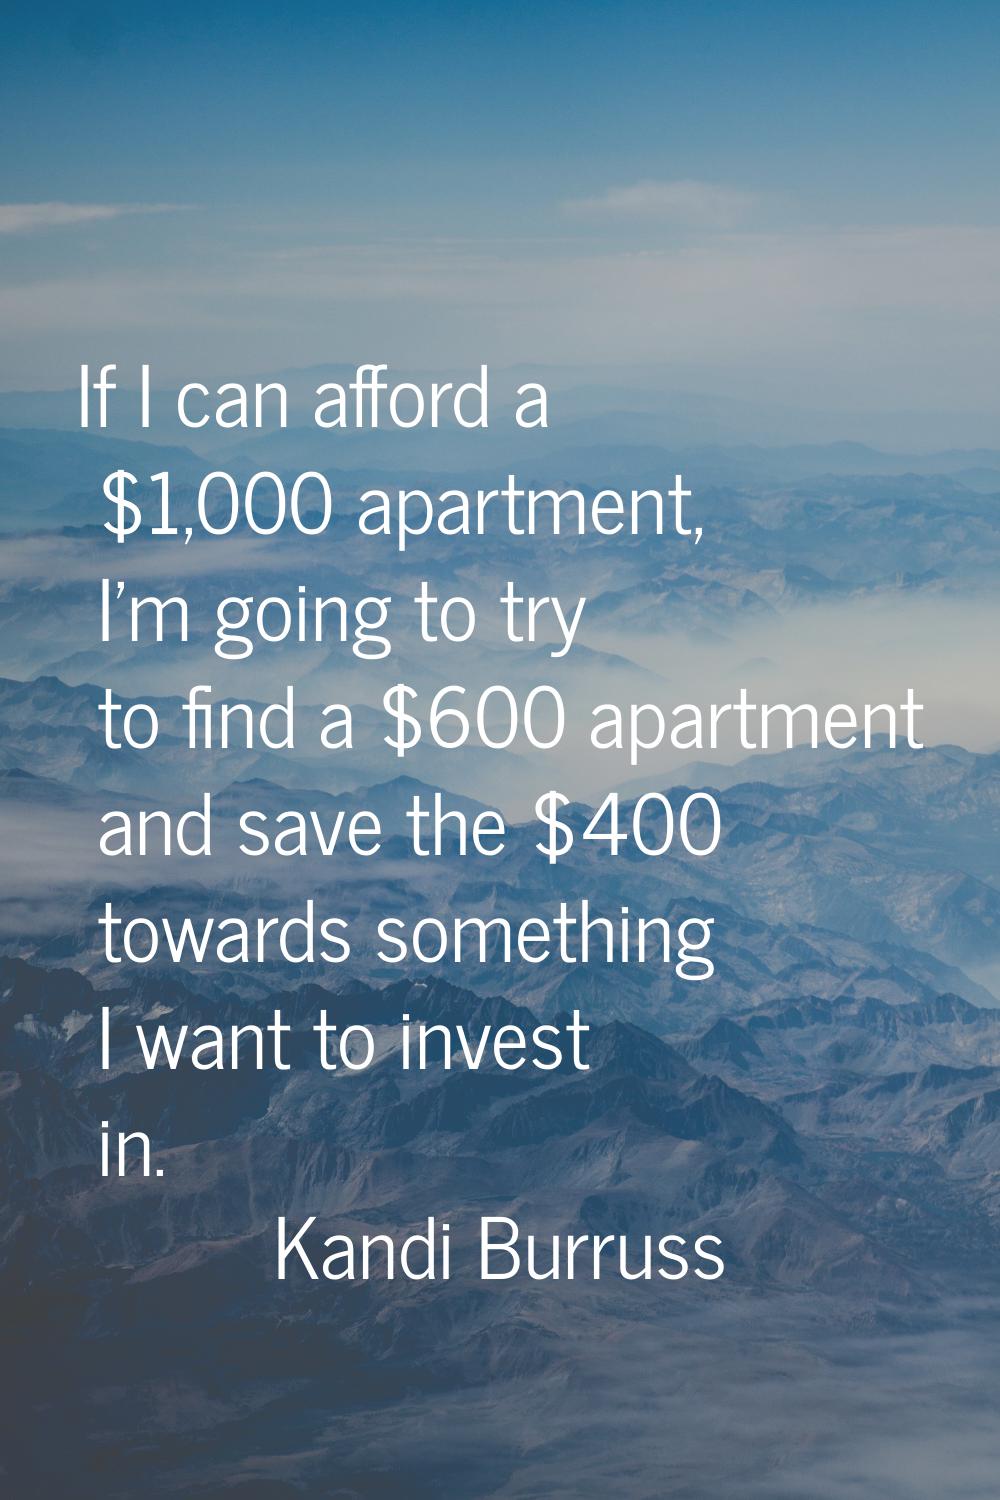 If I can afford a $1,000 apartment, I'm going to try to find a $600 apartment and save the $400 tow